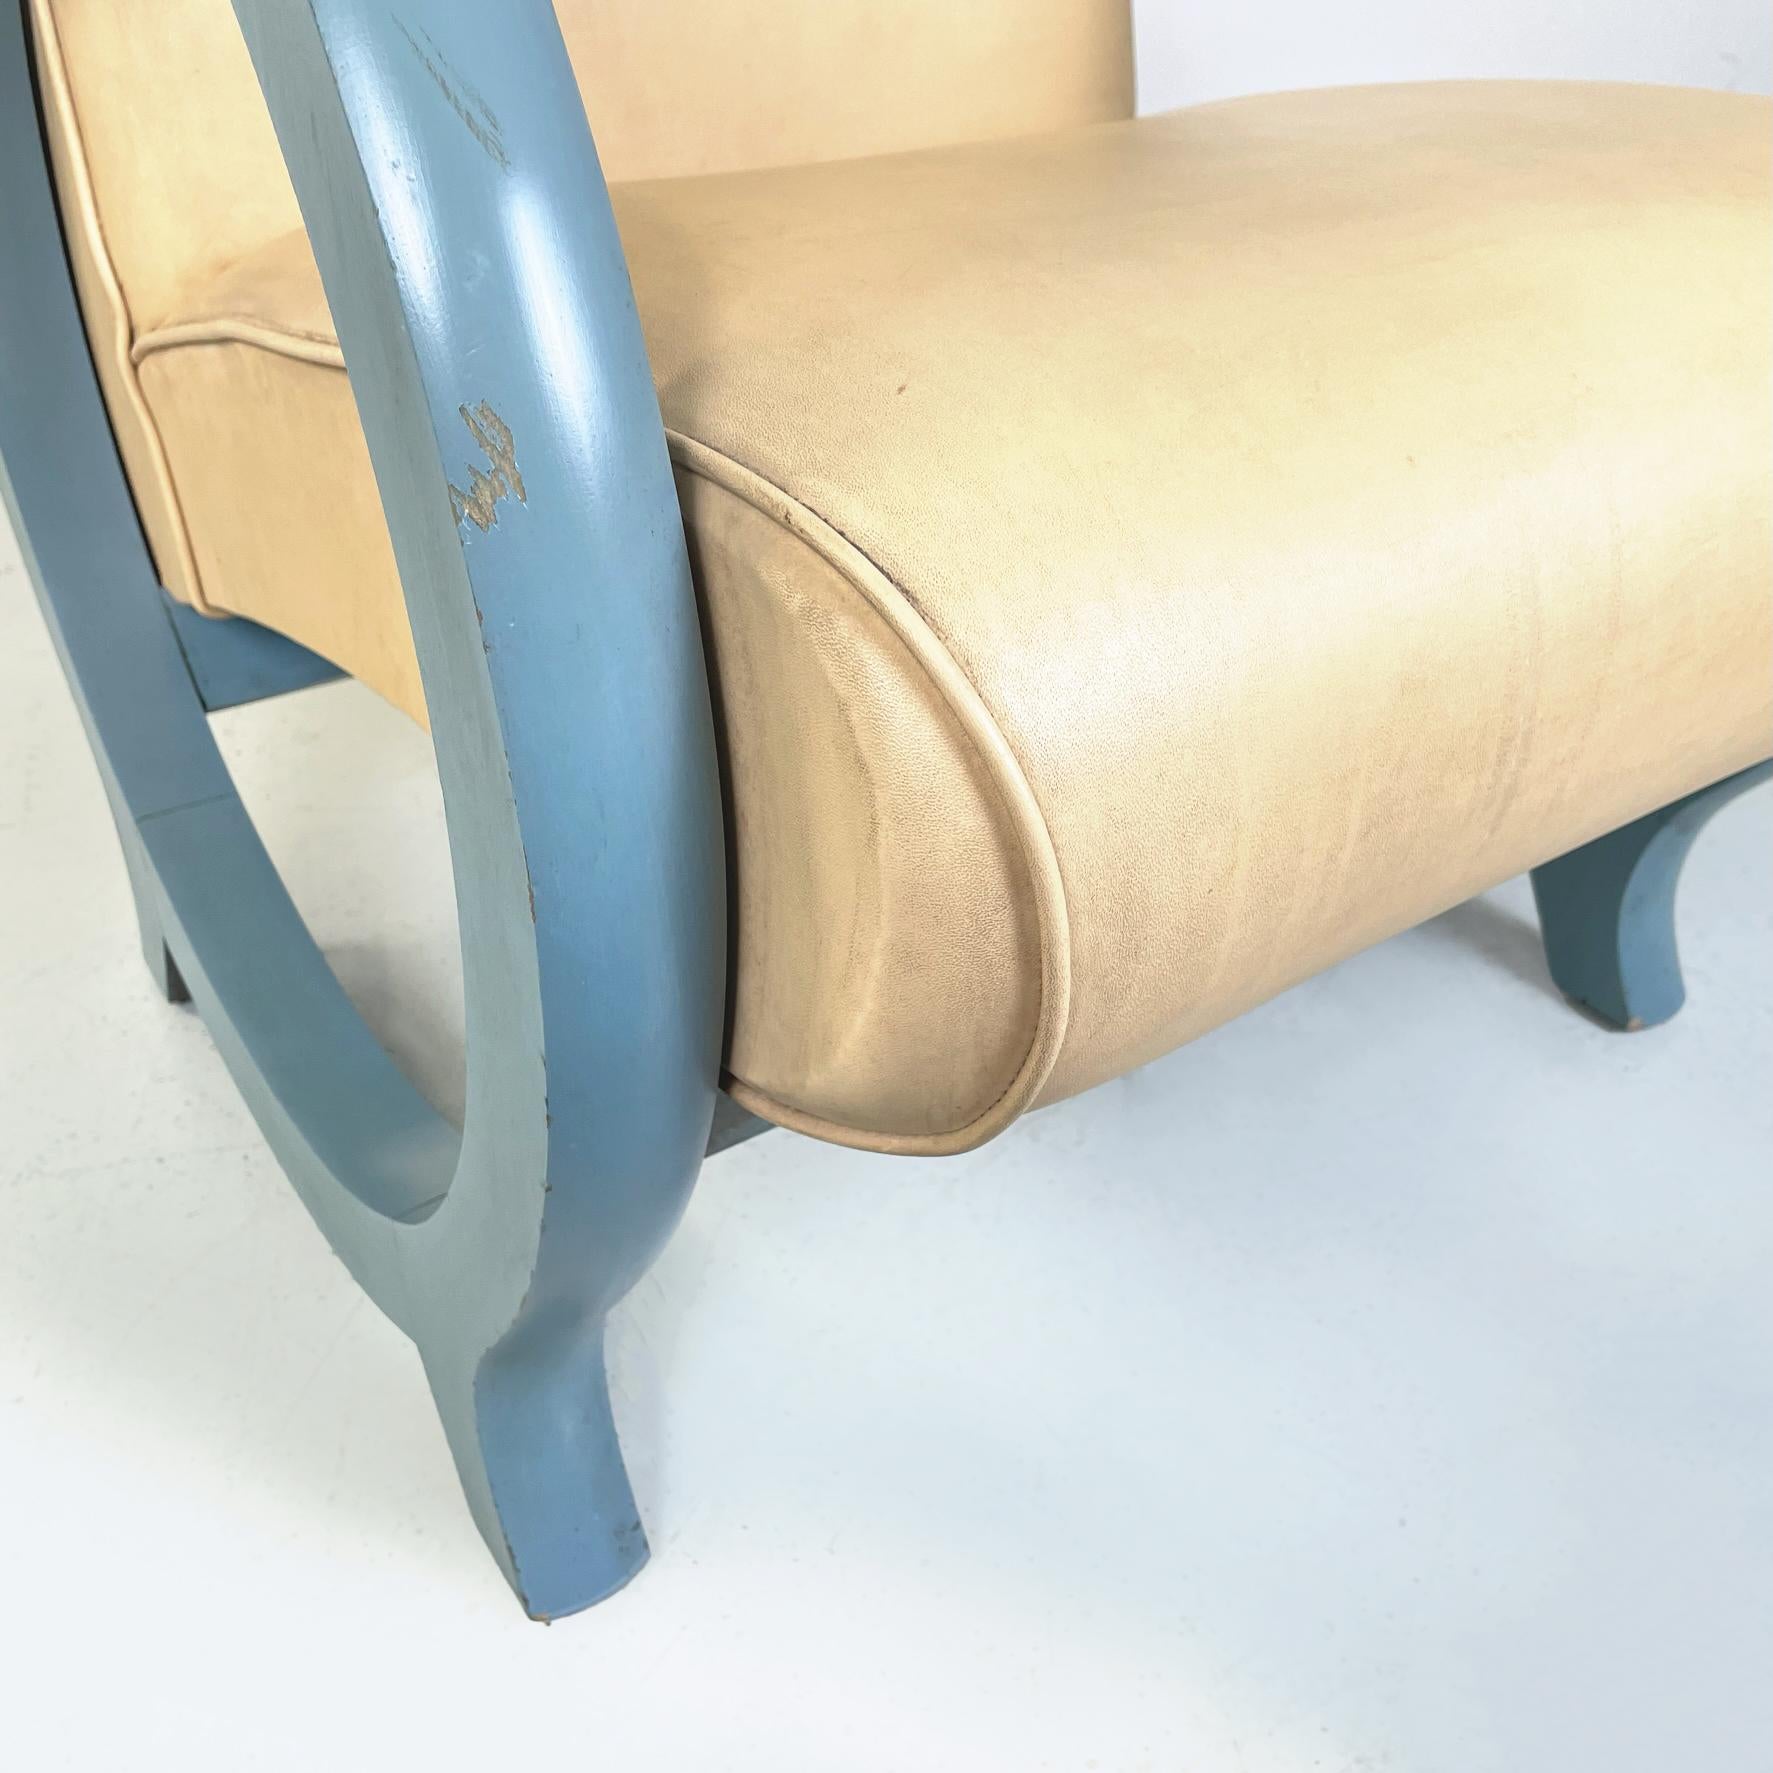 Italian Modern Armchair in Beige Leather and Light Blue Wood, 1980s For Sale 6